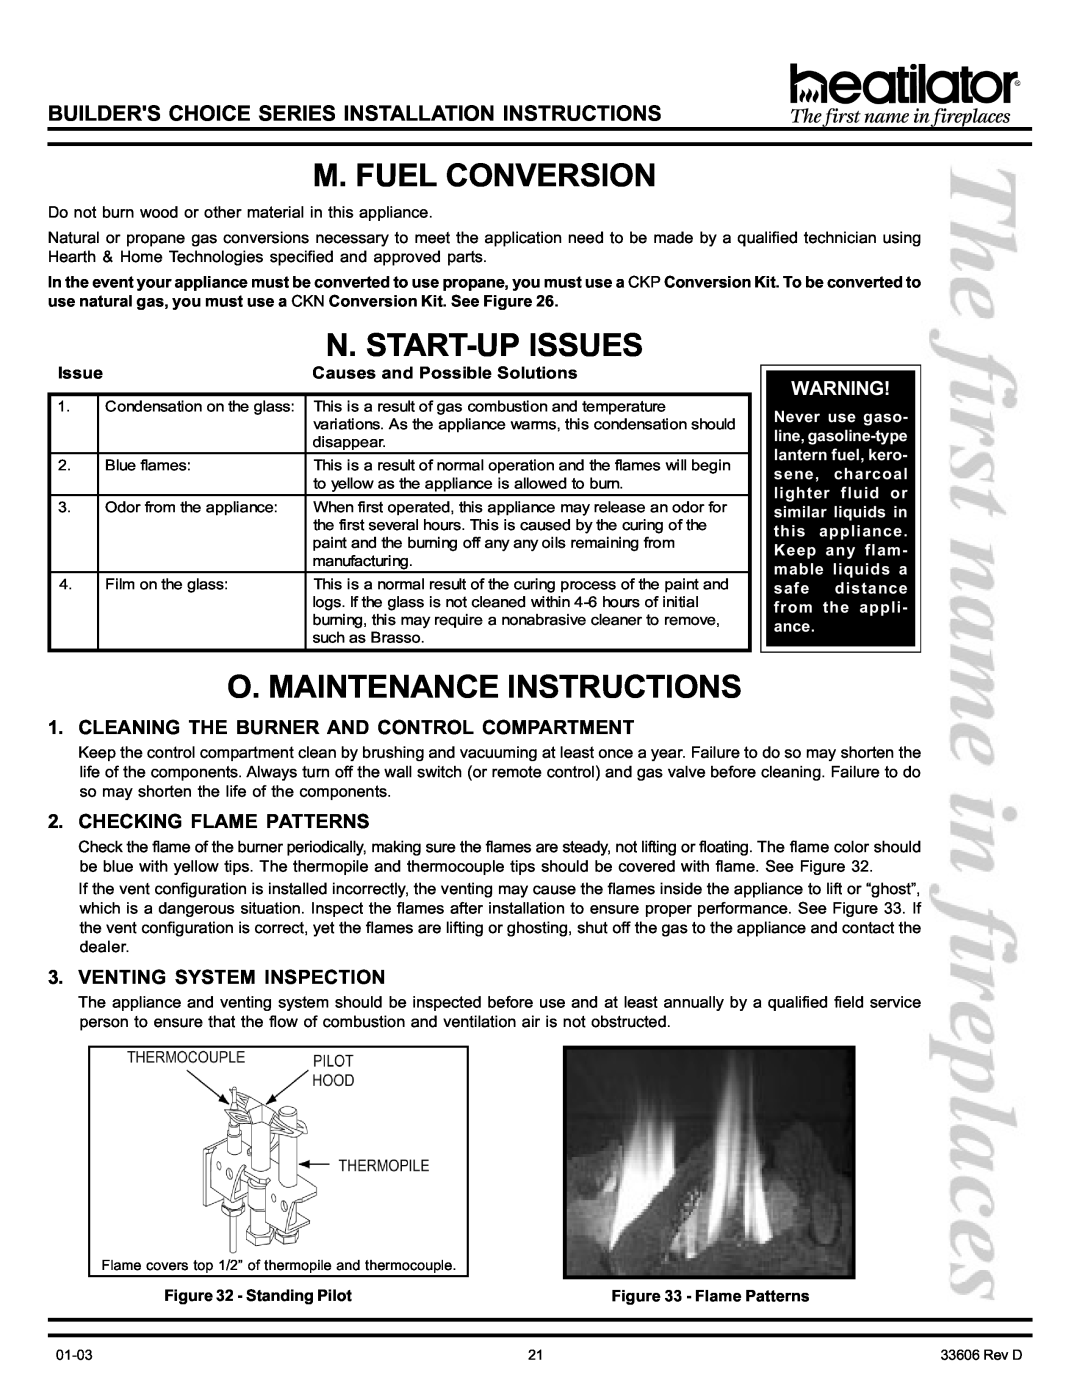 Heatiator BCDV36 manual M. Fuel Conversion, N. Start-Upissues, O. Maintenance Instructions, Checking Flame Patterns, Issue 